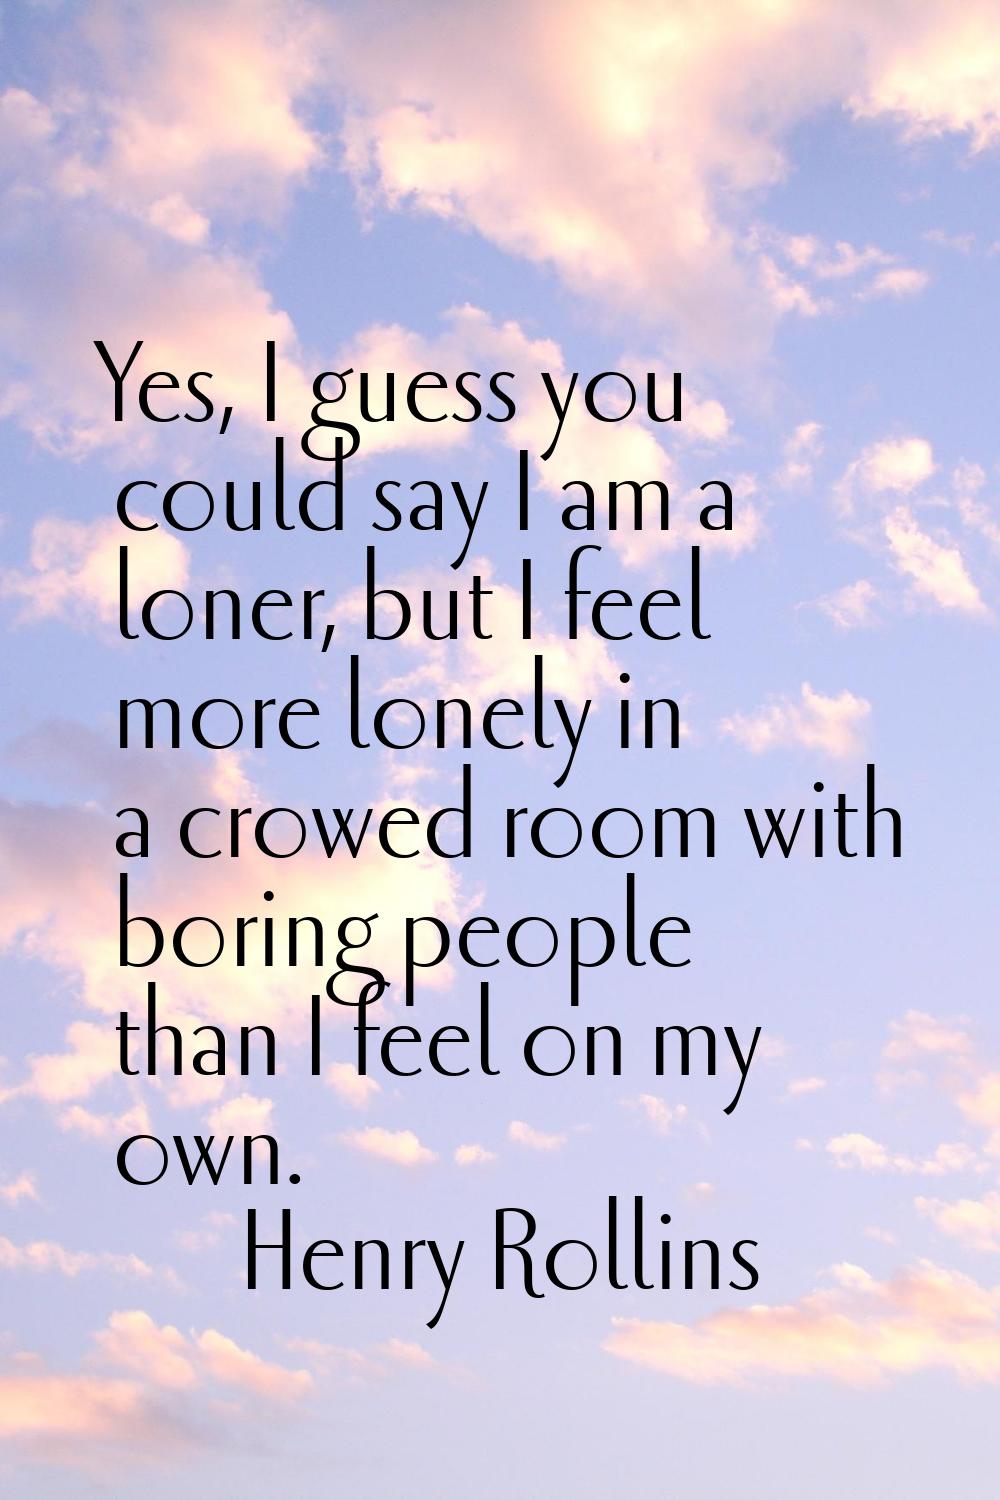 Yes, I guess you could say I am a loner, but I feel more lonely in a crowed room with boring people